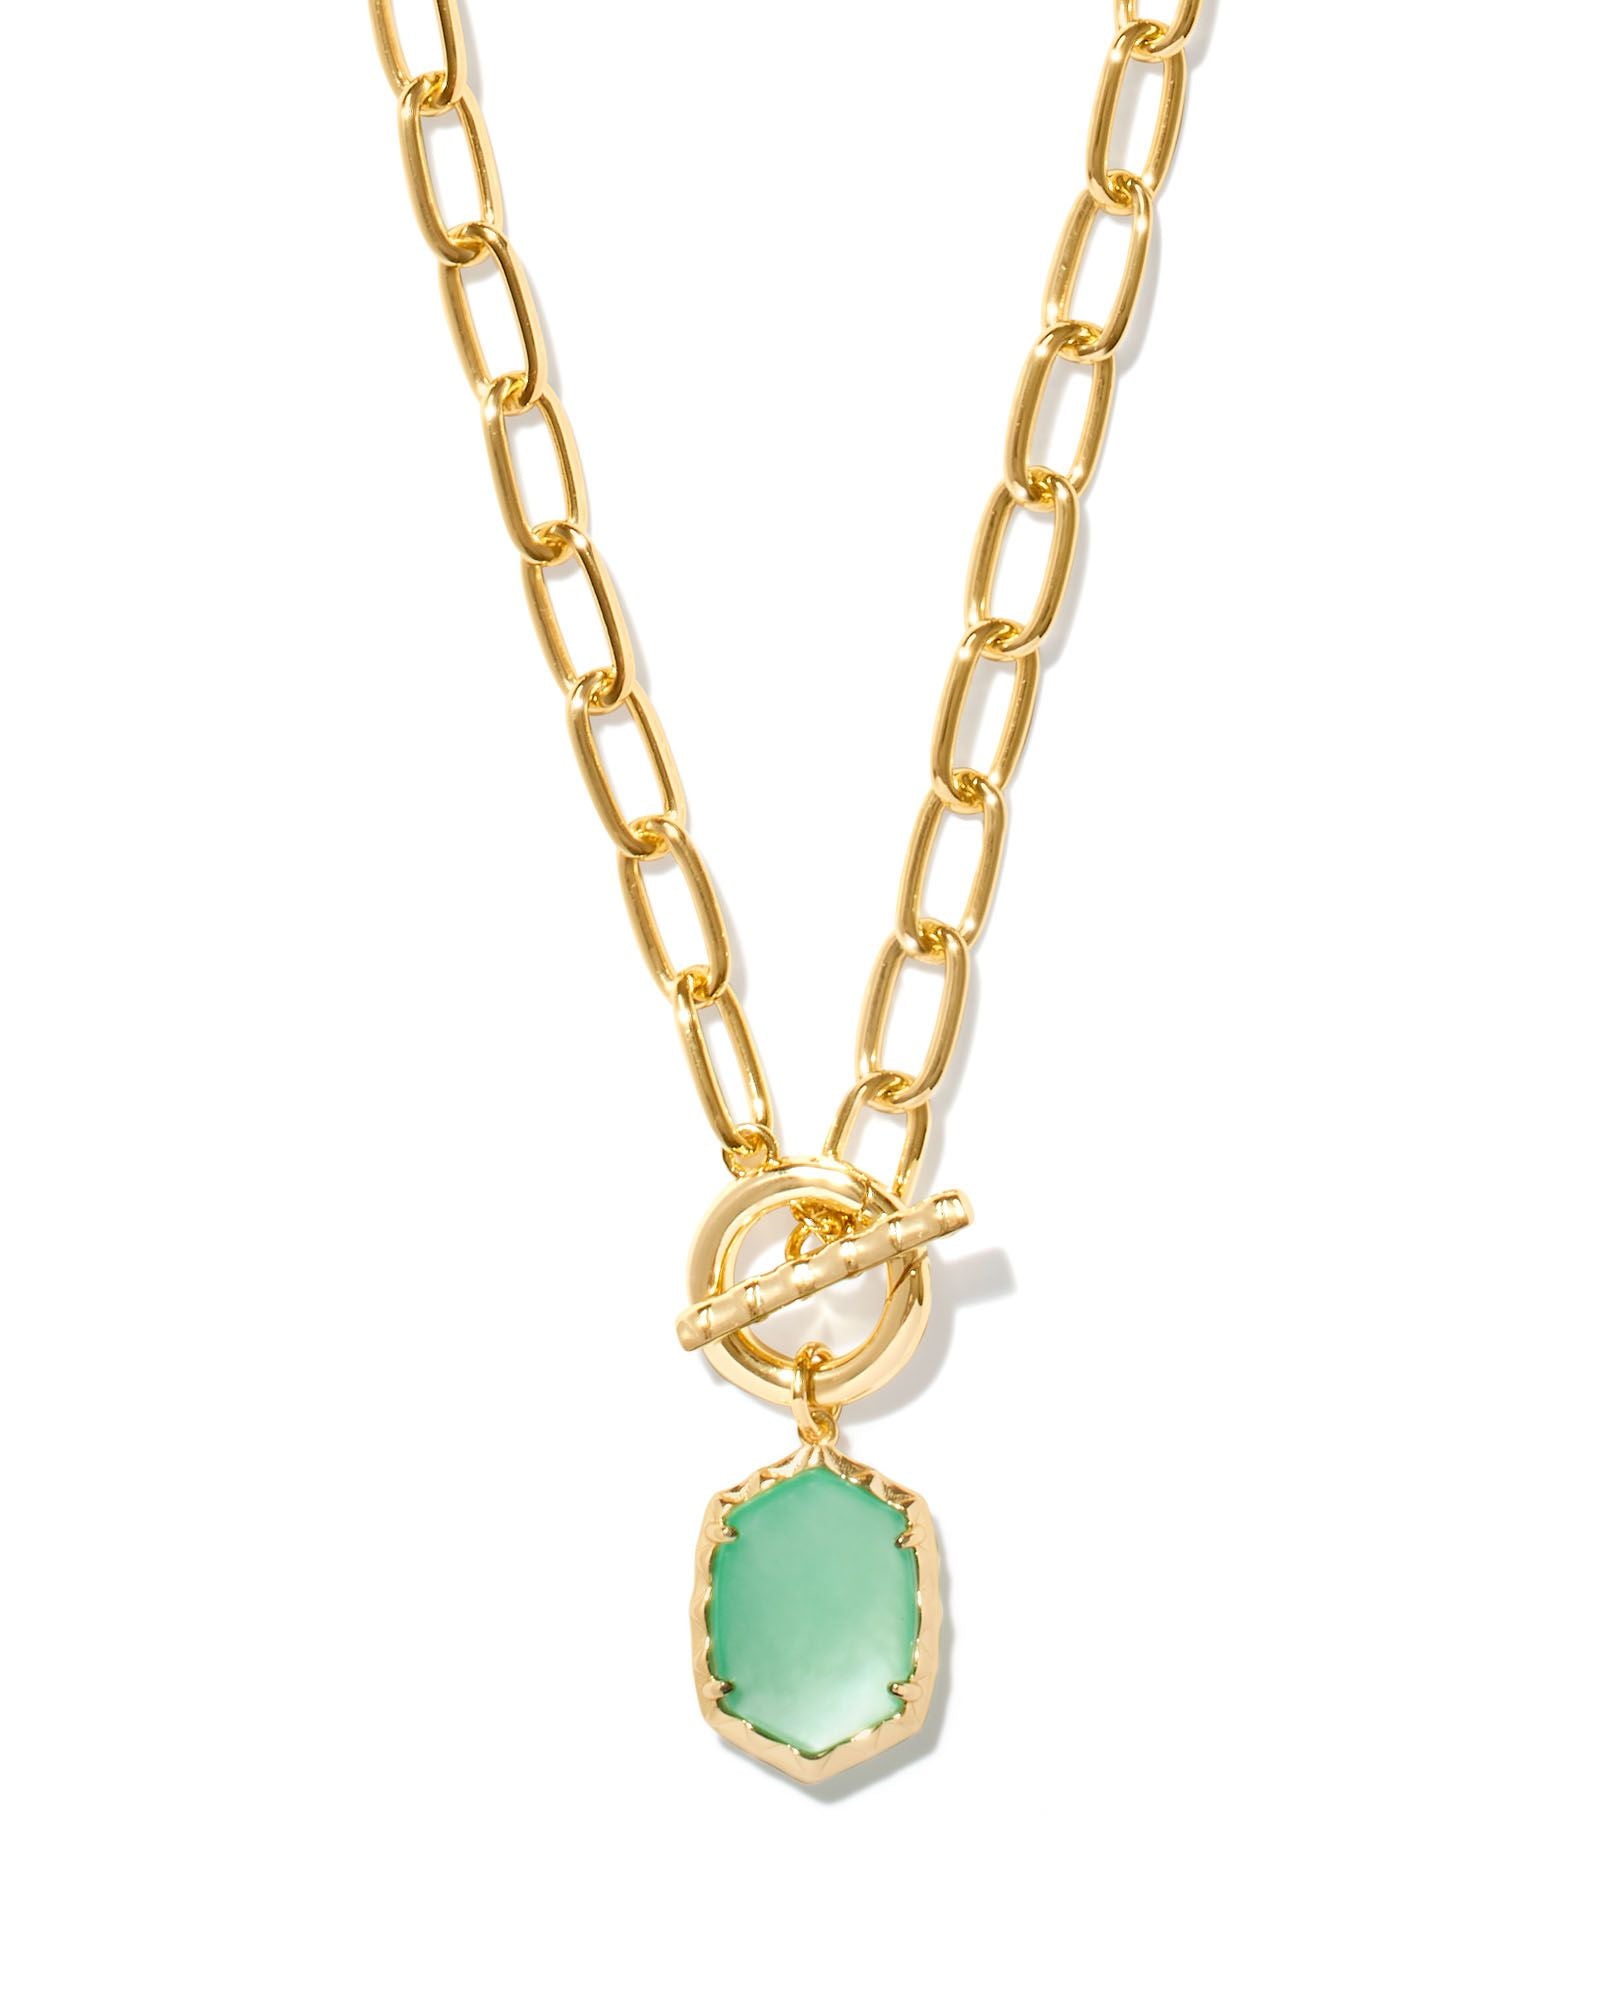 Daphne Gold Link and Chain Necklace Light Green MOP